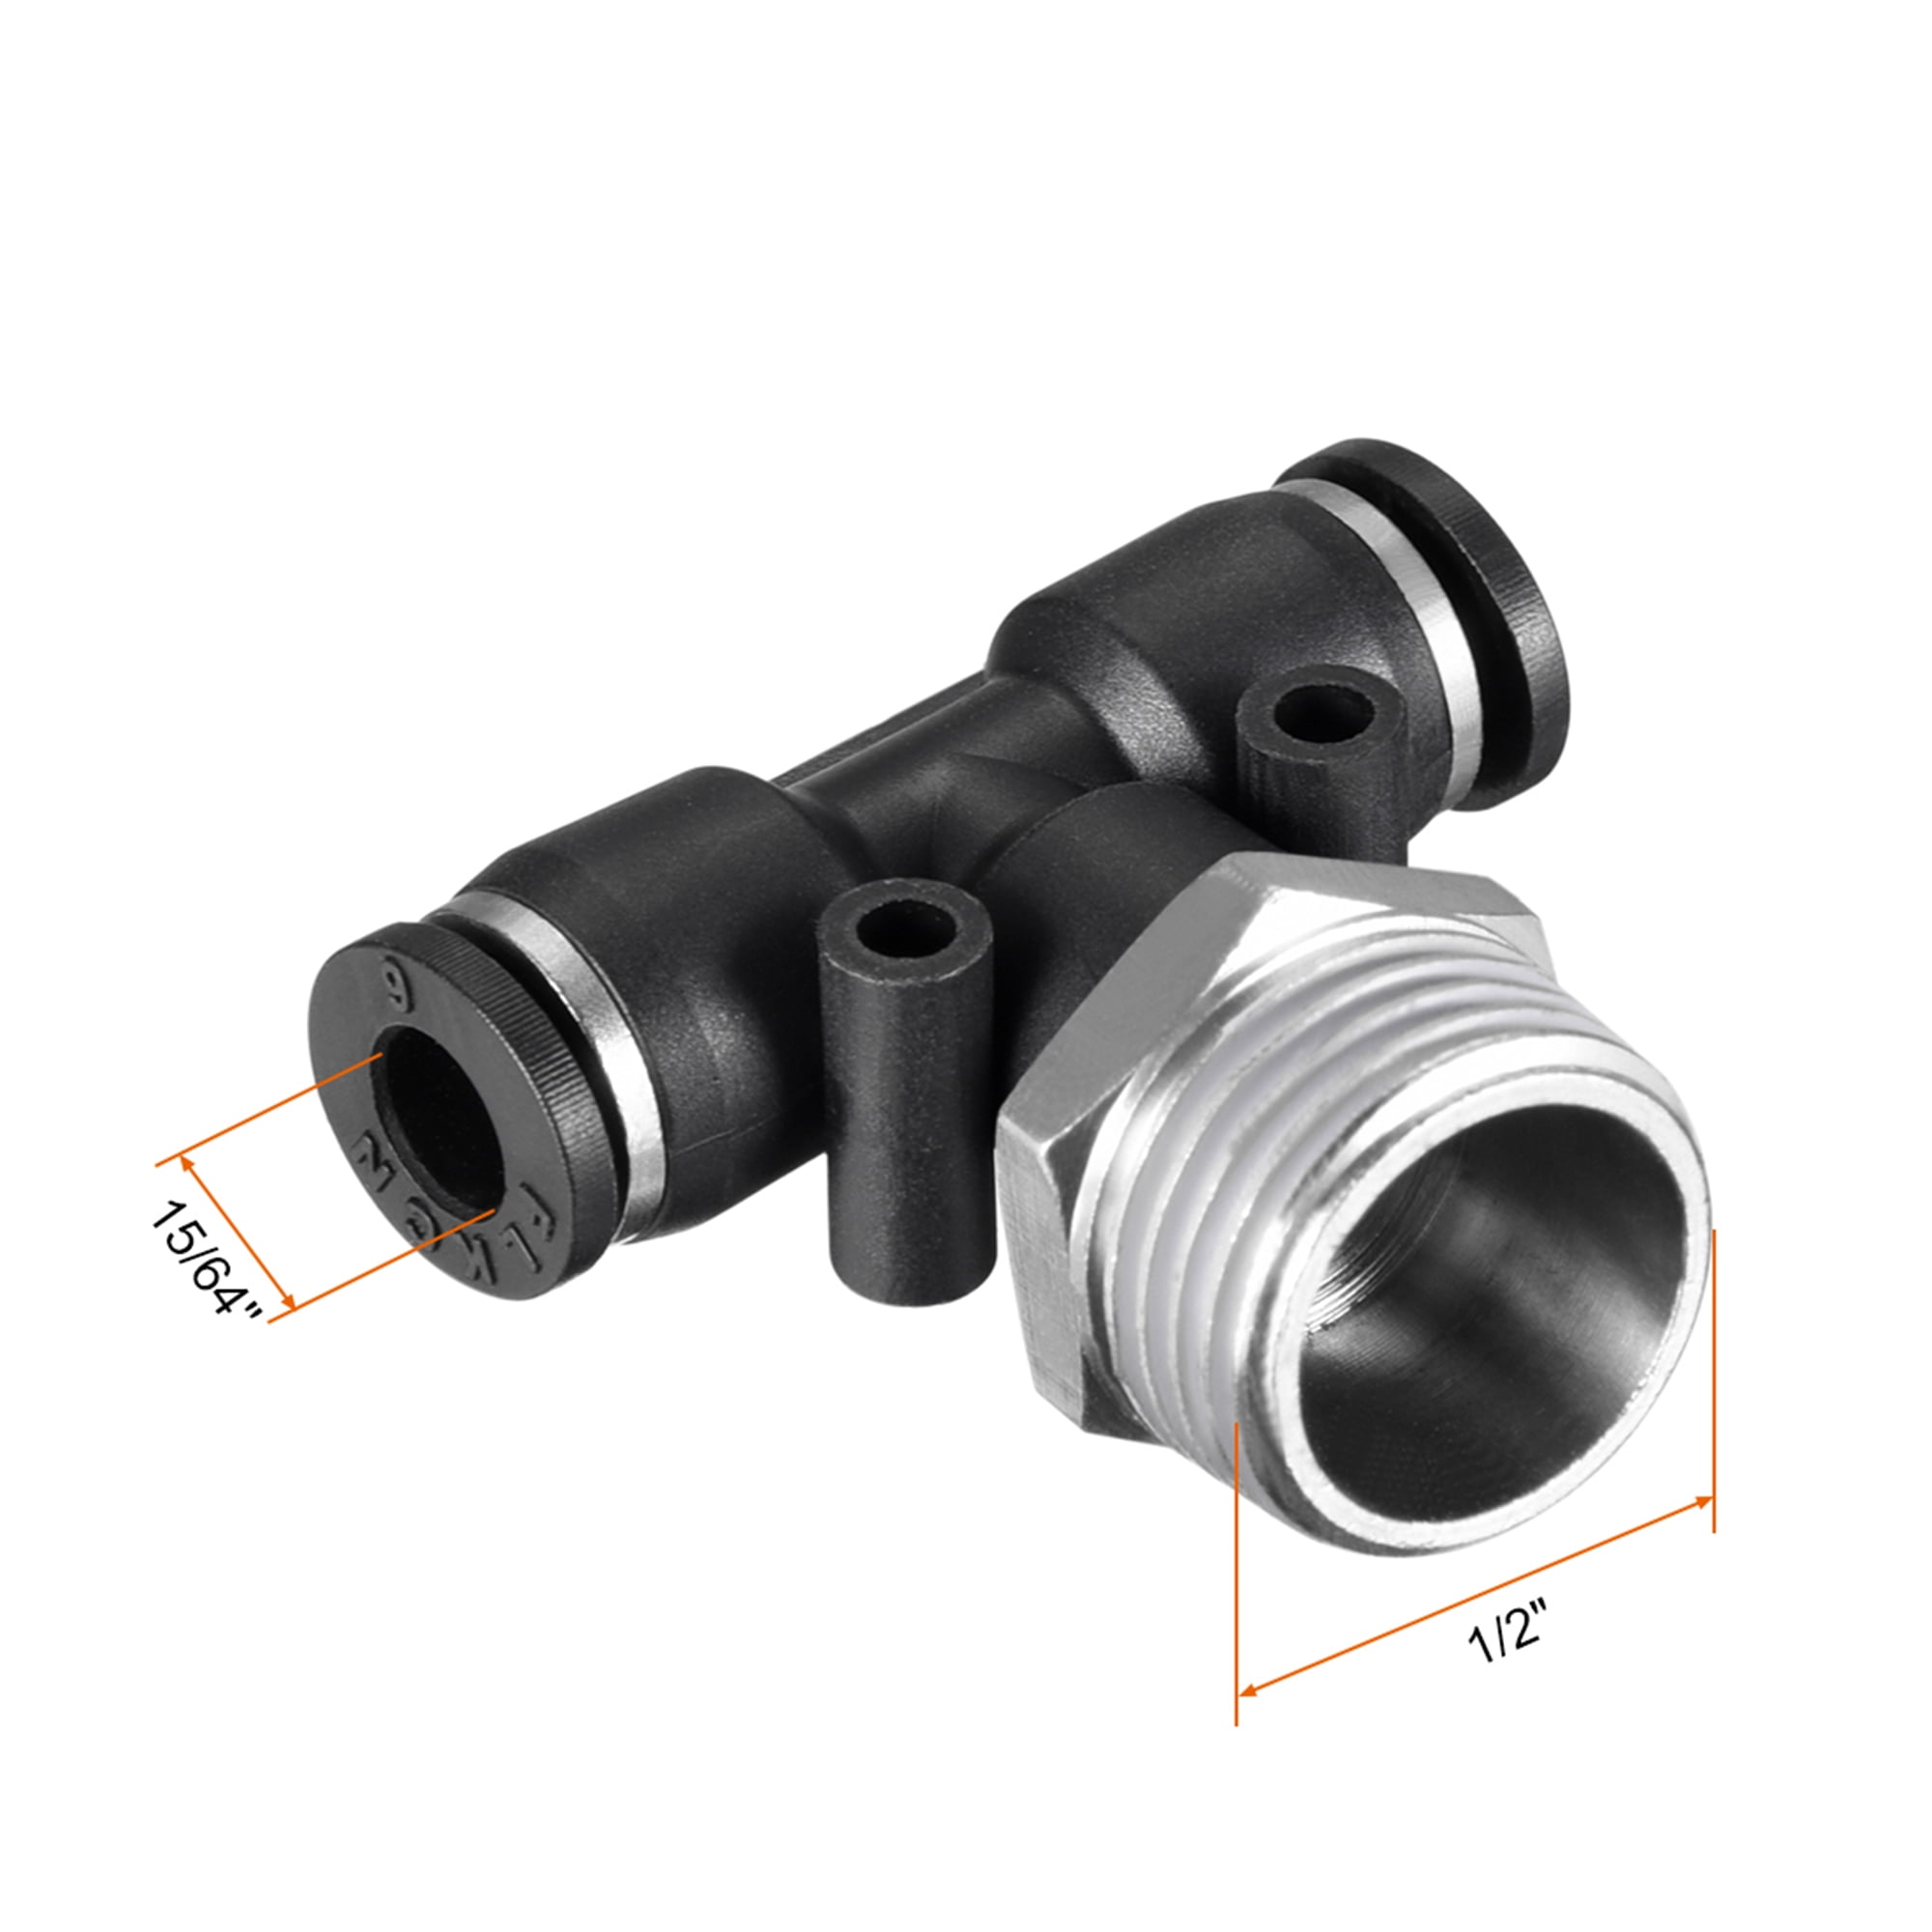 PB6-02 Push to Connect Accessories Type T T-Thread Connecting Pipe Connect 15/64OD x 1/4 G Male Thread Snap fit Fittings Tube Fittings Push Lock 2 Pieces 